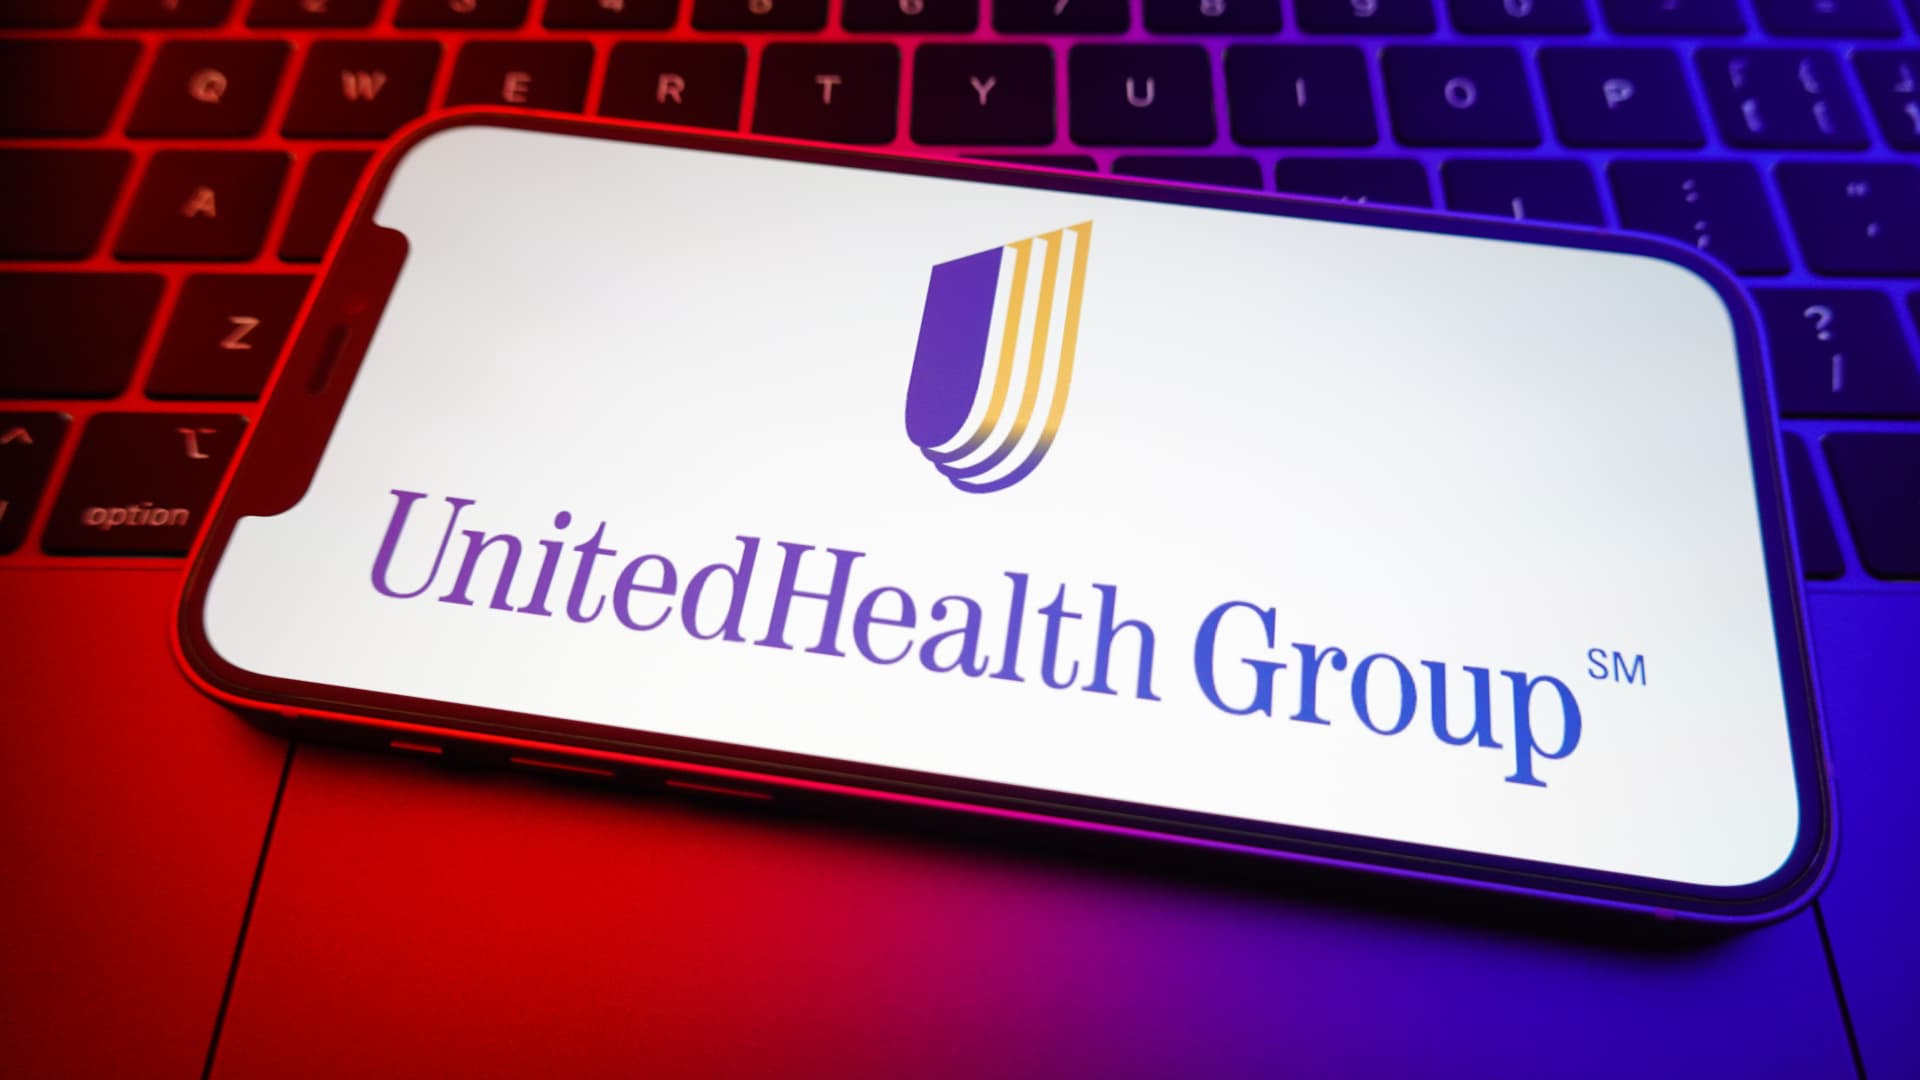 UnitedHealth Group has paid more than $3 billion to providers following cyberattack - CNBC